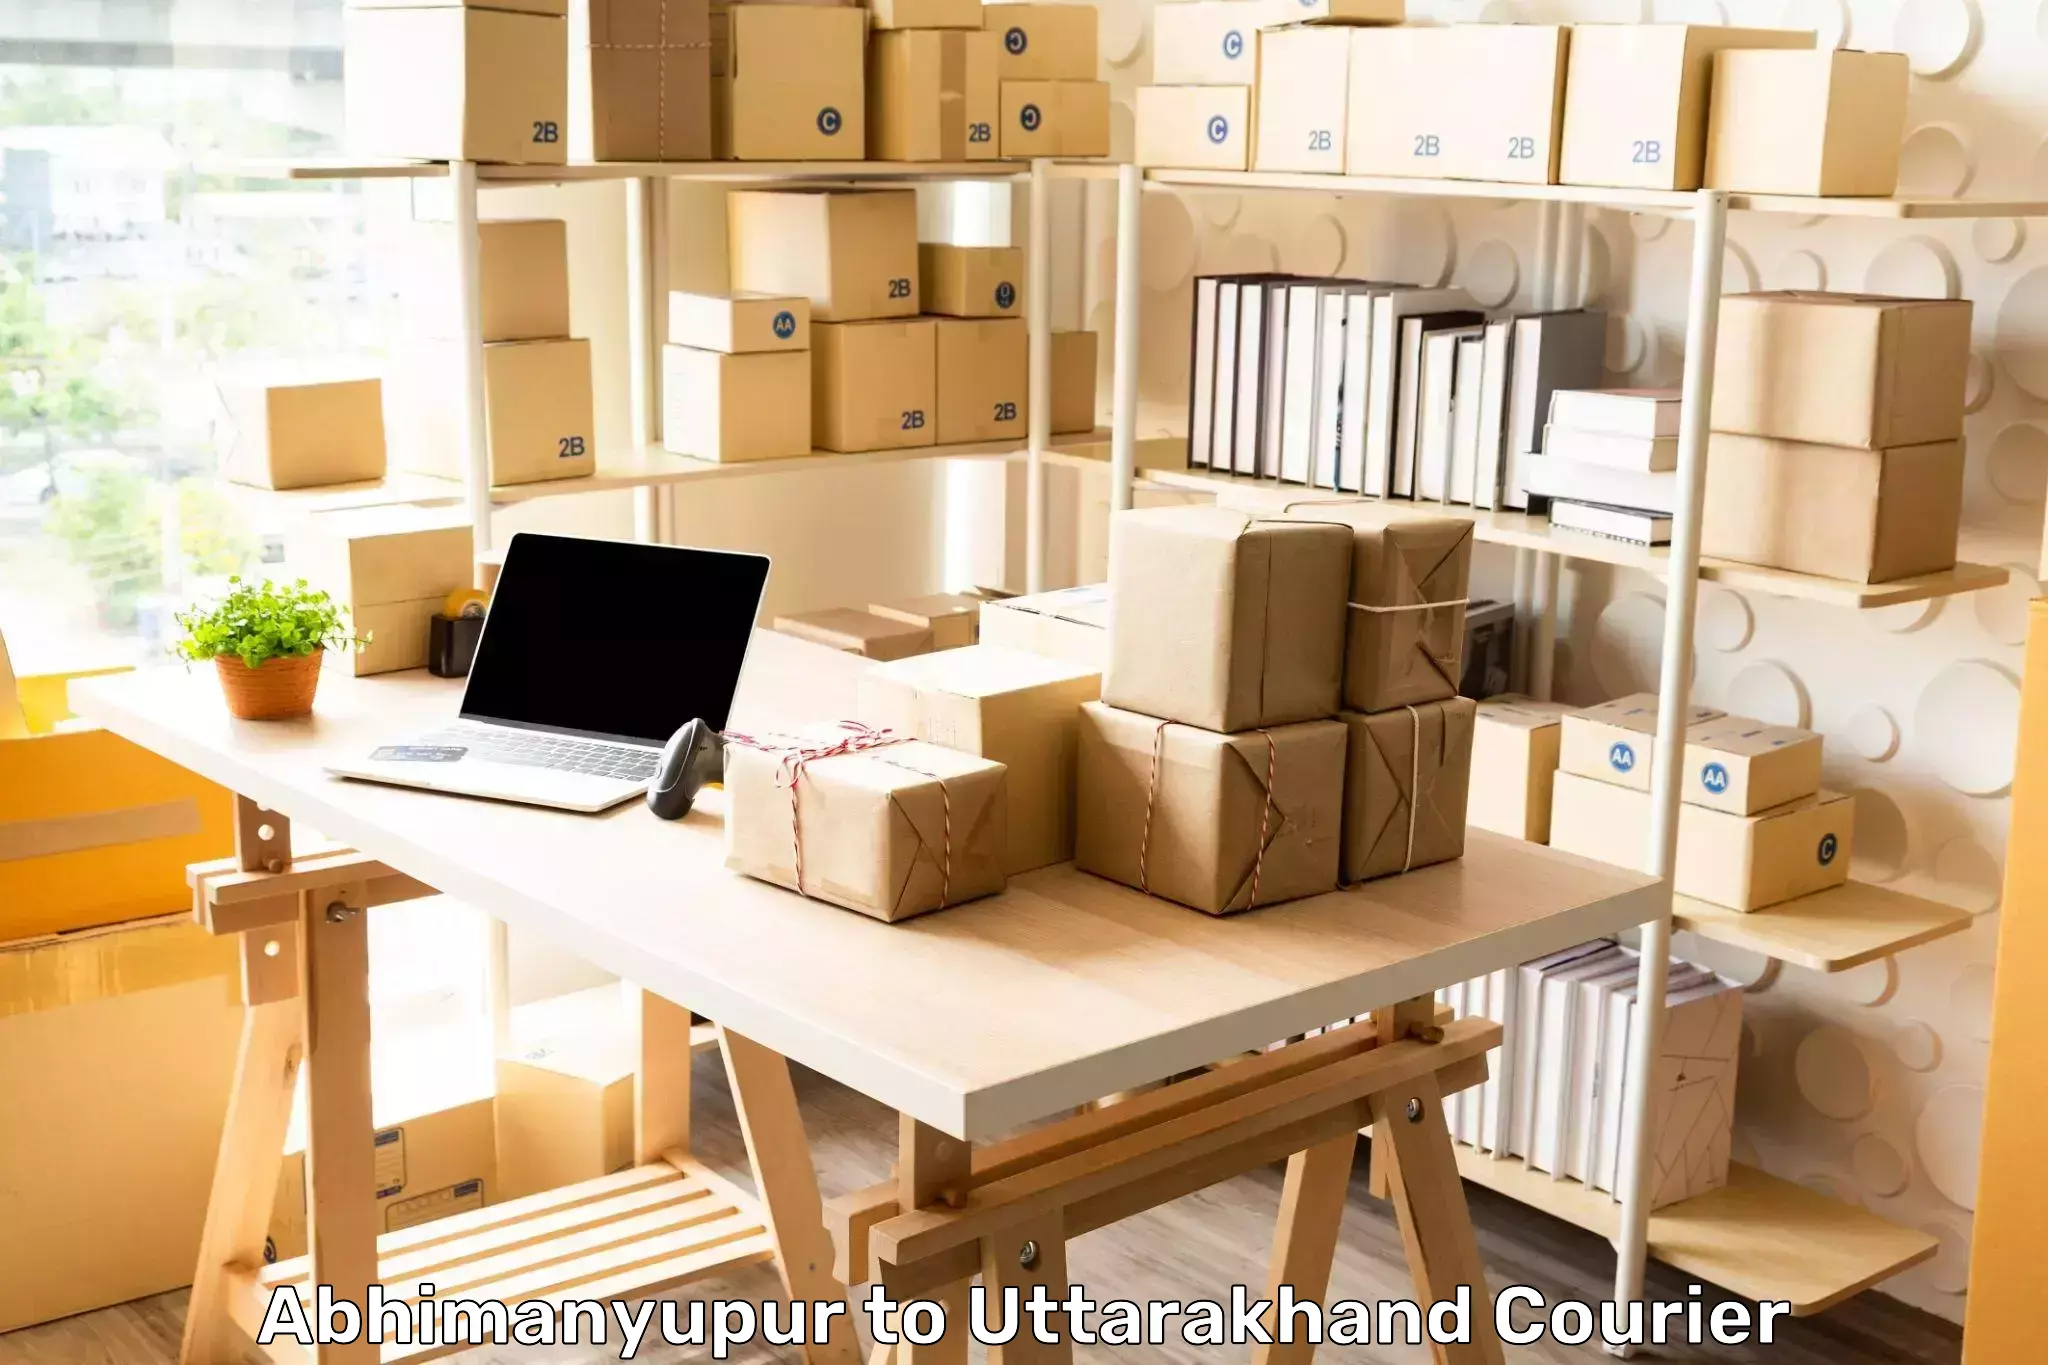 Large-scale shipping solutions Abhimanyupur to Khatima